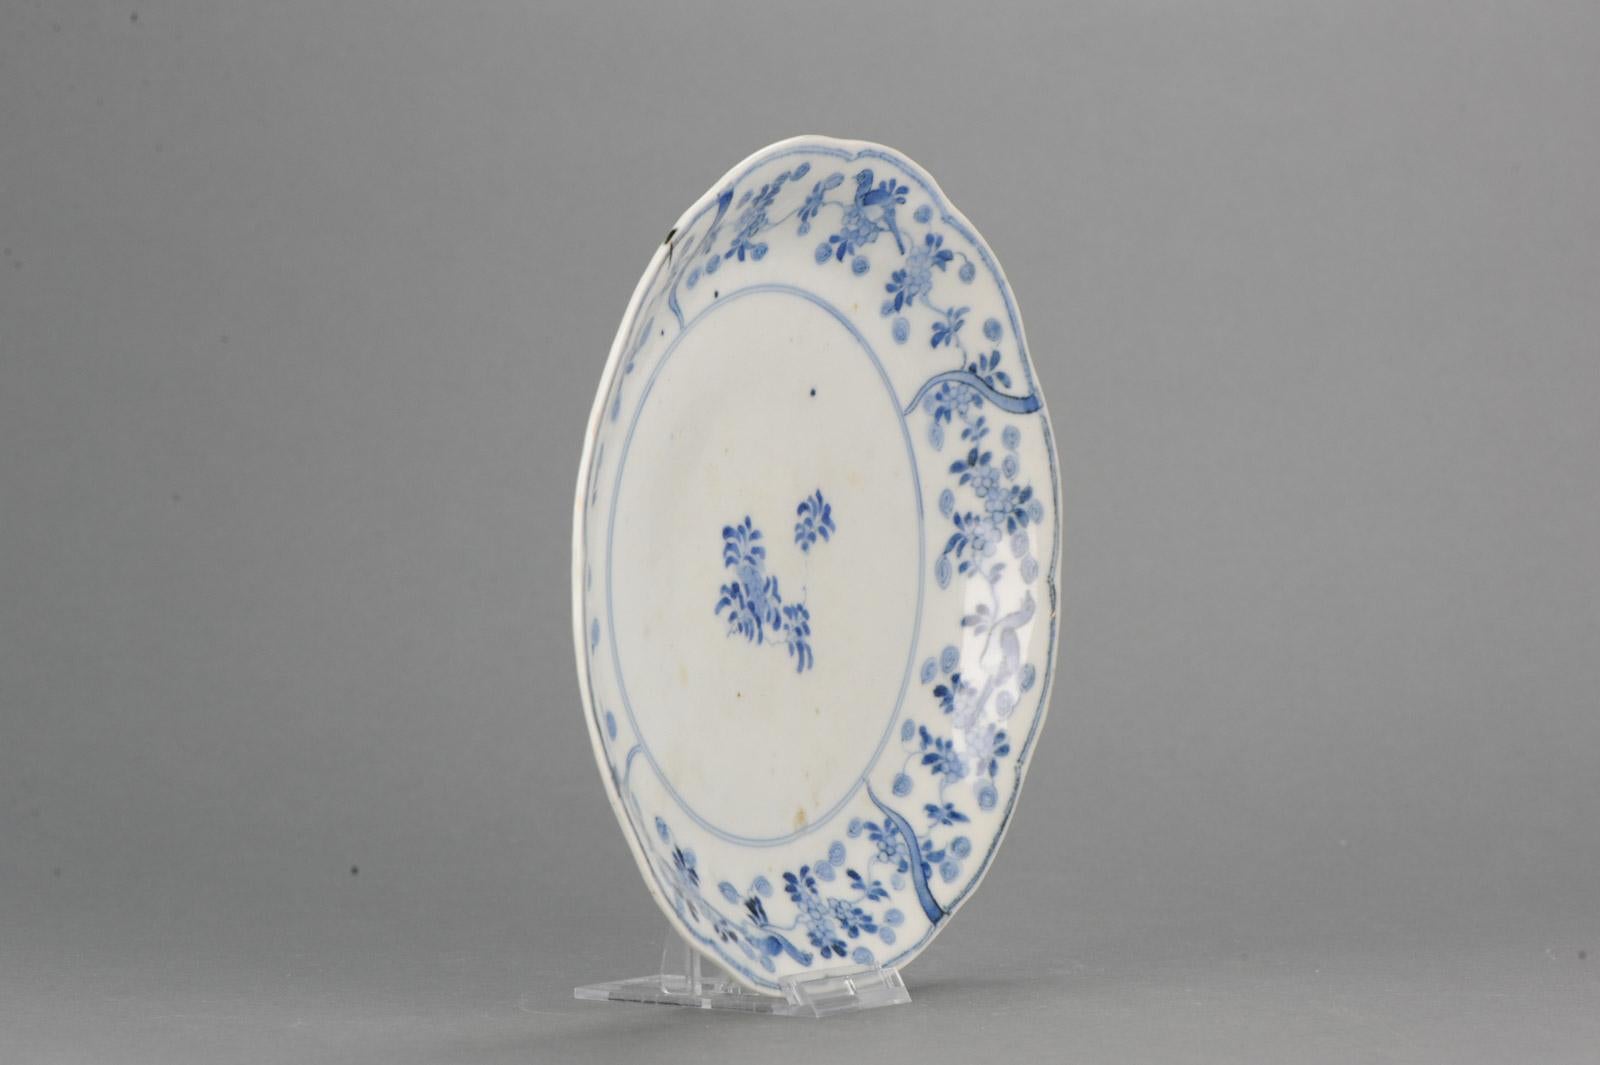 Antique Japanese Edo Plate Period Japan, 1720-1760 18th Century

A very nice plate.

Additional information:
Material: Porcelain & Pottery
Type: Plates
Region of Origin: Japan
Country of Manufacturing: Japan
Period: 18th century
Condition: Perfect 